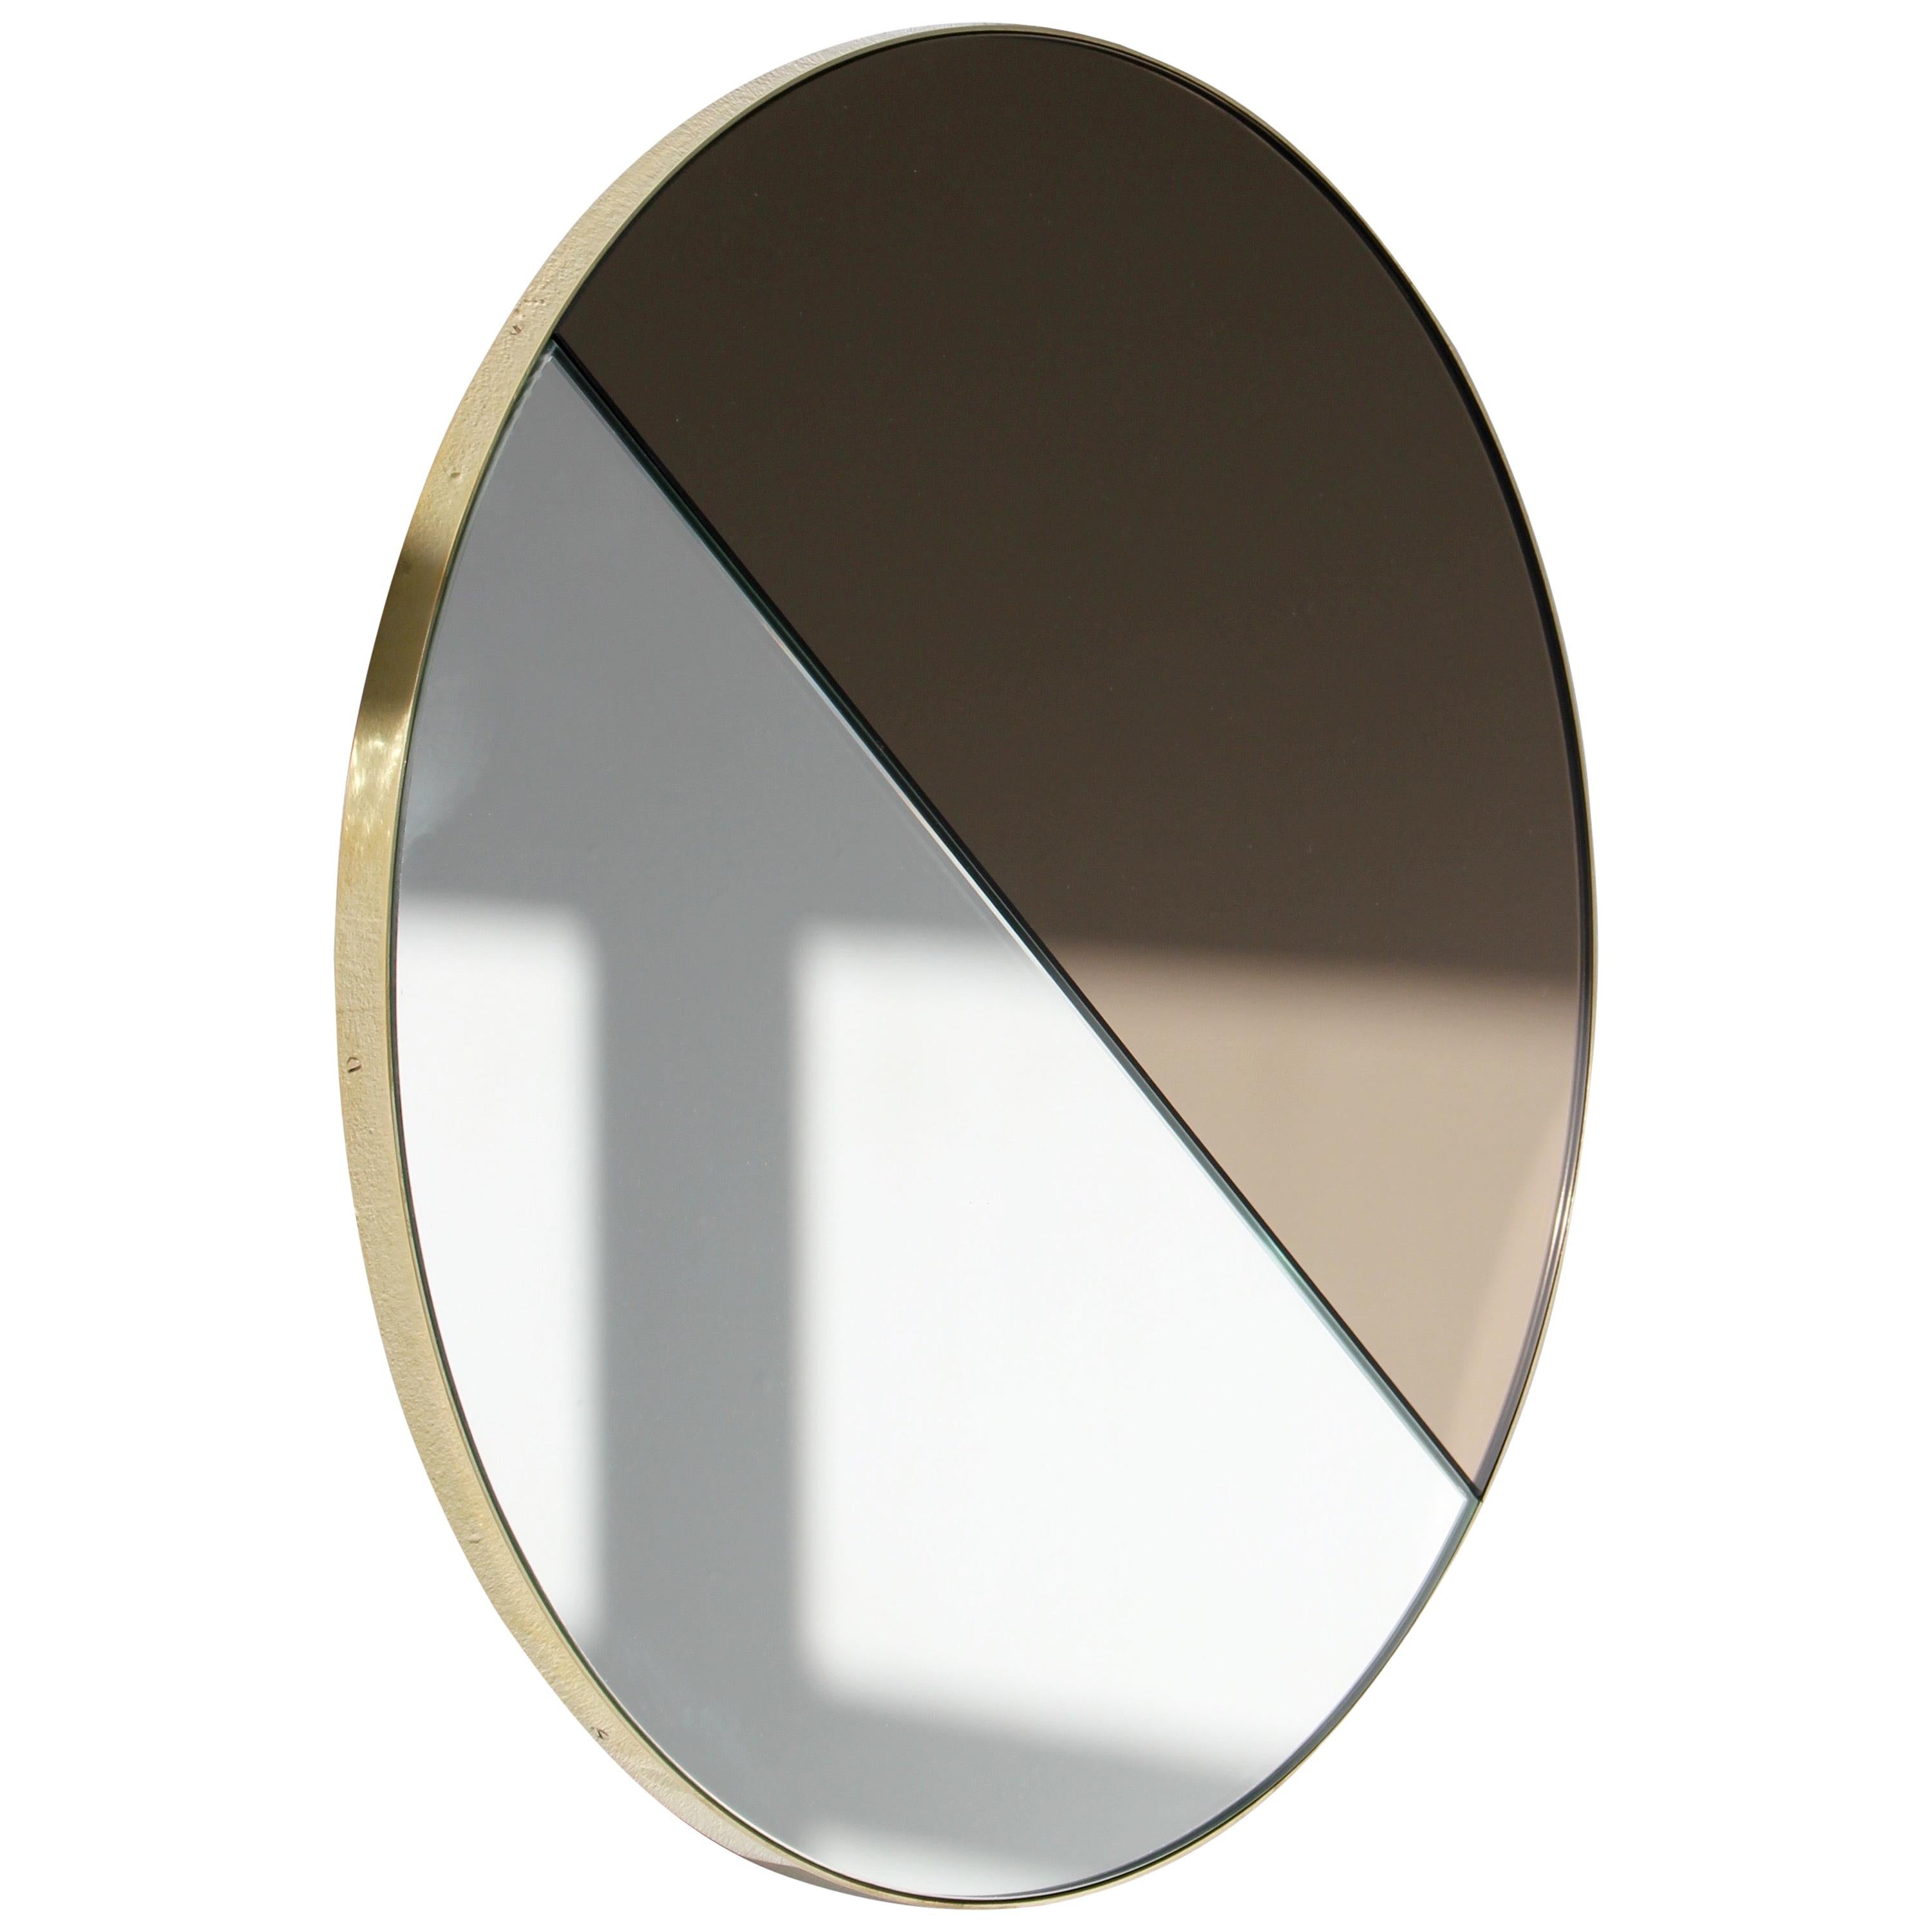 Orbis Dualis Mixed Silver and Bronze Round Mirror with Brass Frame, Large For Sale